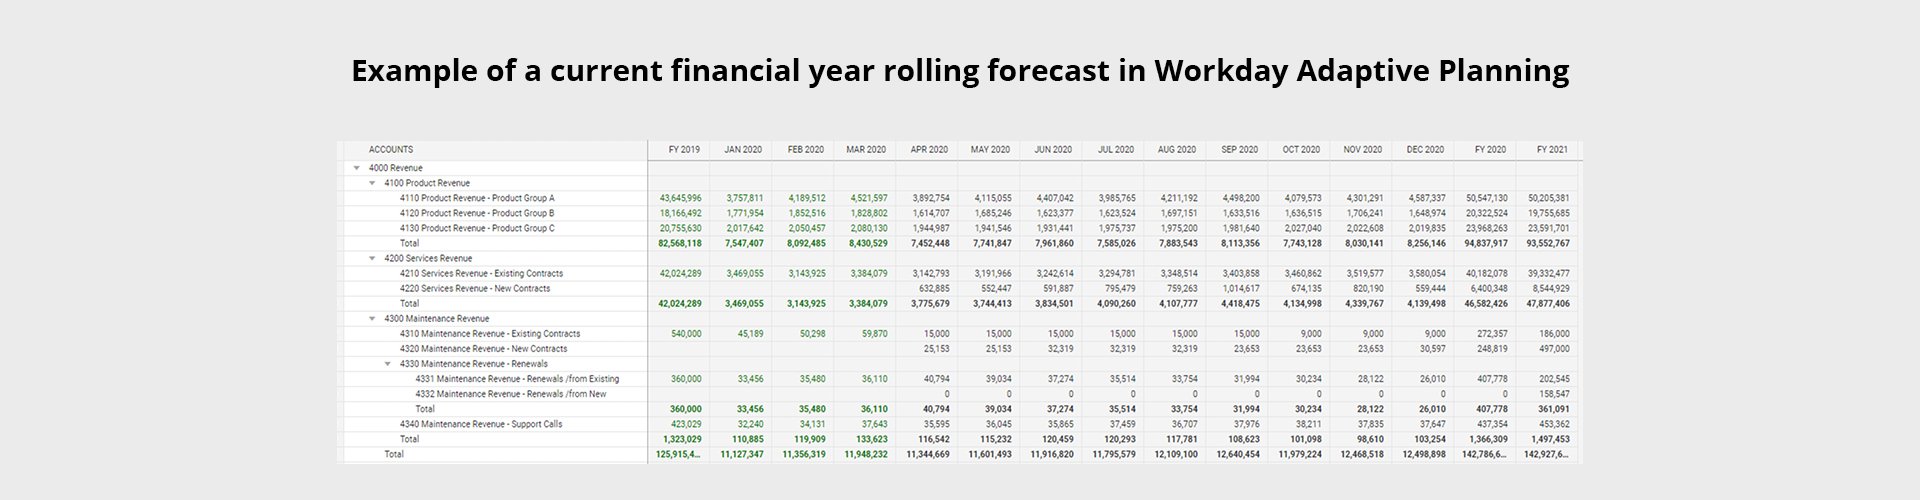 Example of a current financial year rolling forecast in Workday Adaptive Planning